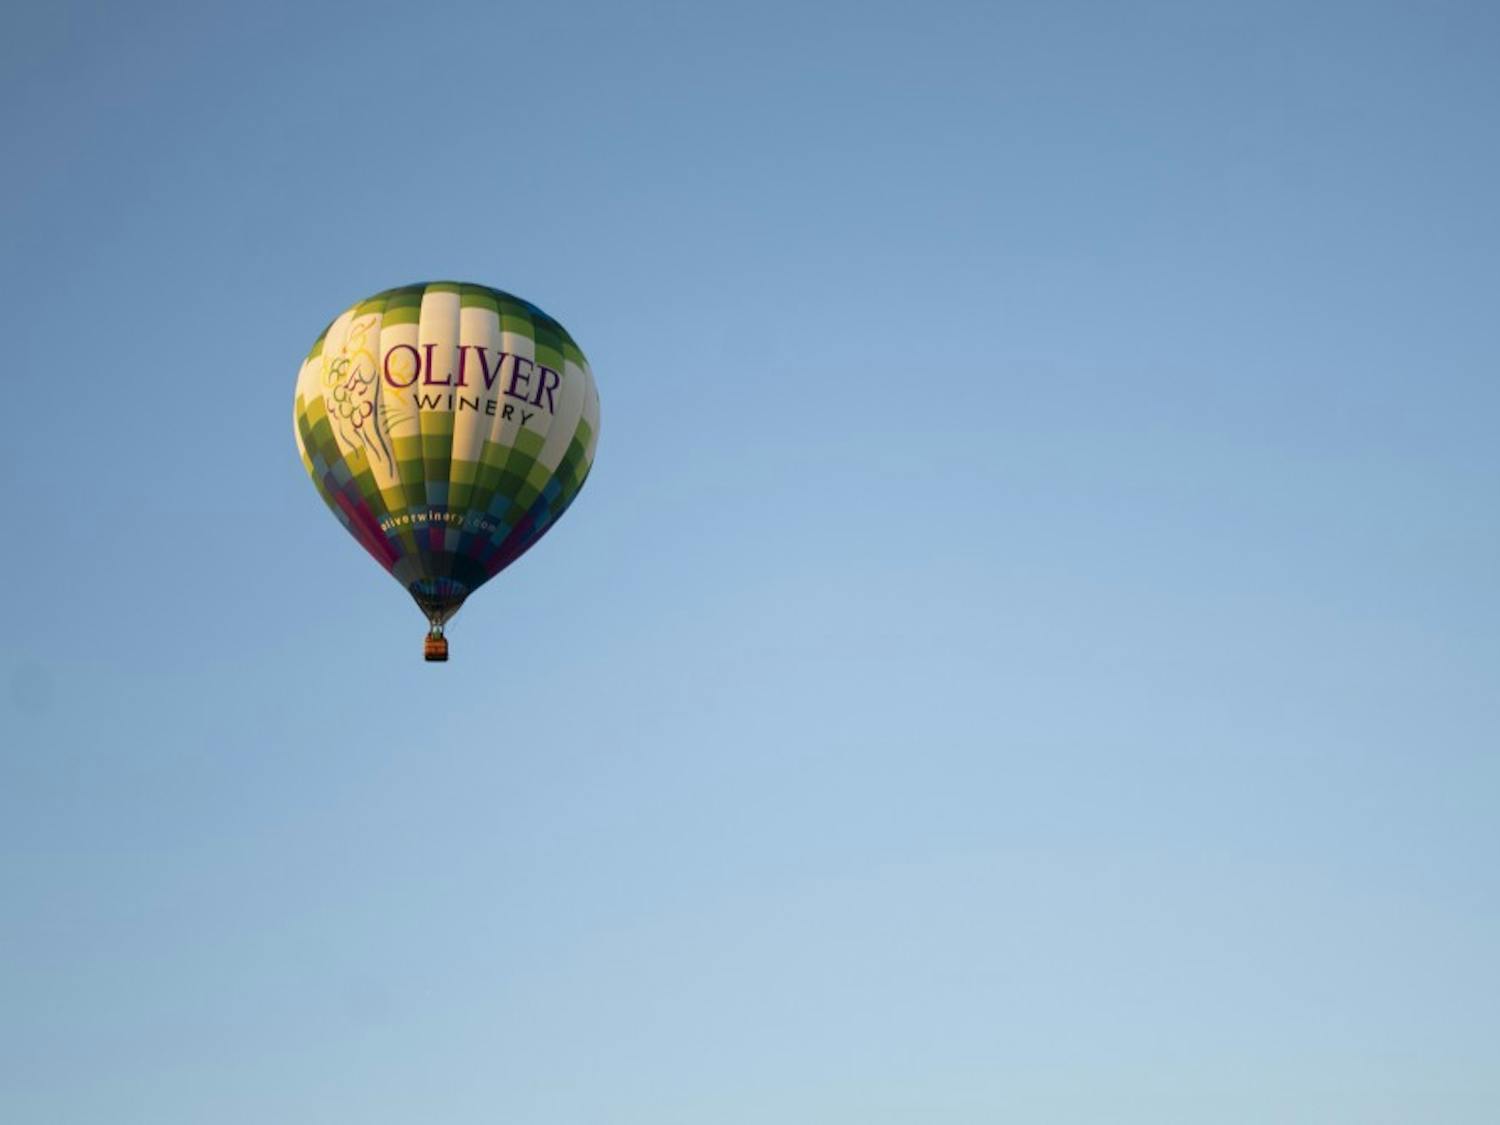 7th annual Kiwanis Club of South Central Indiana Balloon Fest